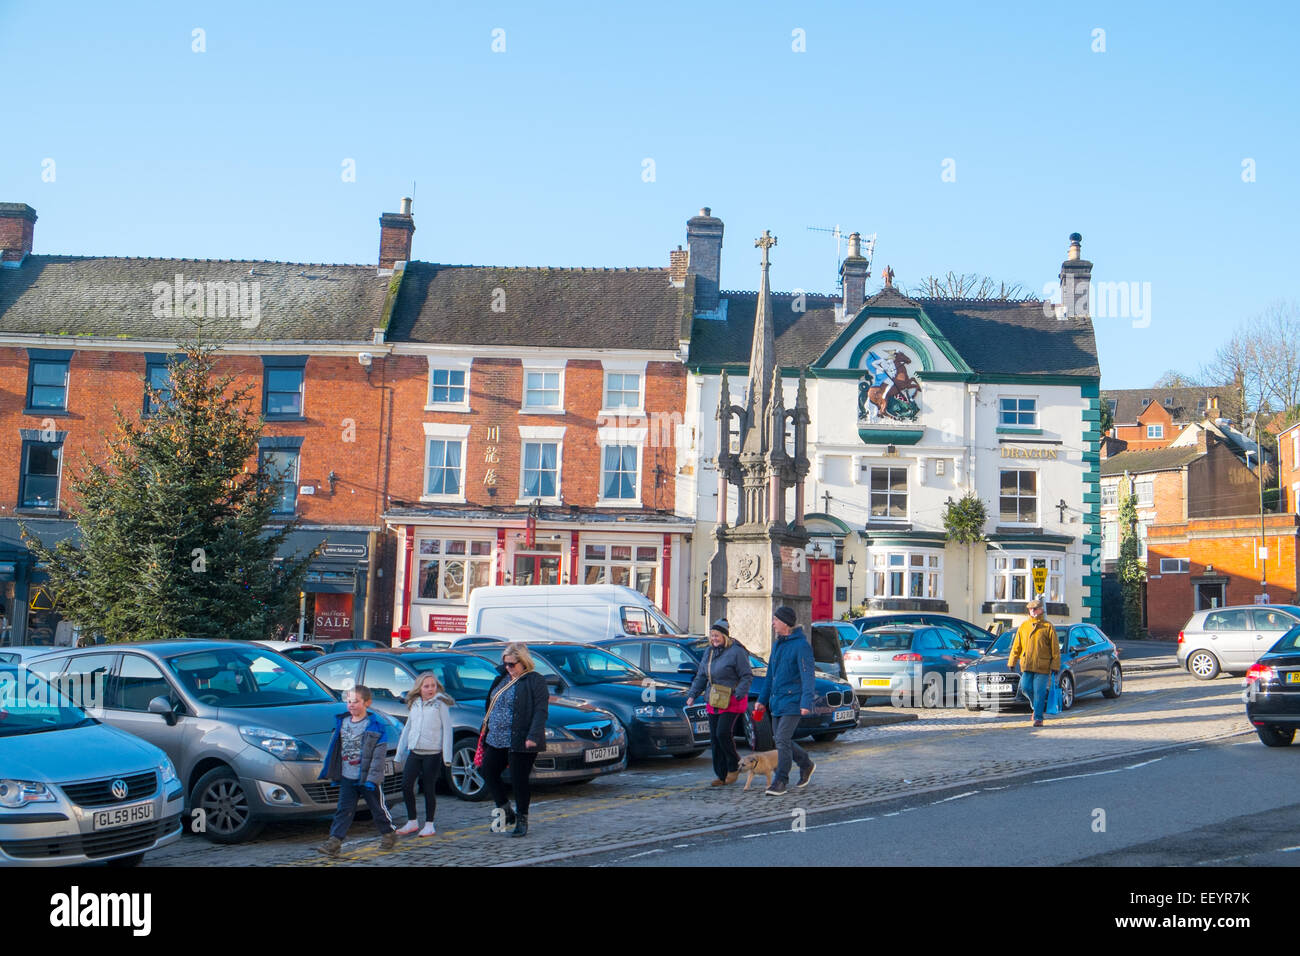 Ashbourne, a market town in Derbyshire,England family walking through town centre Stock Photo